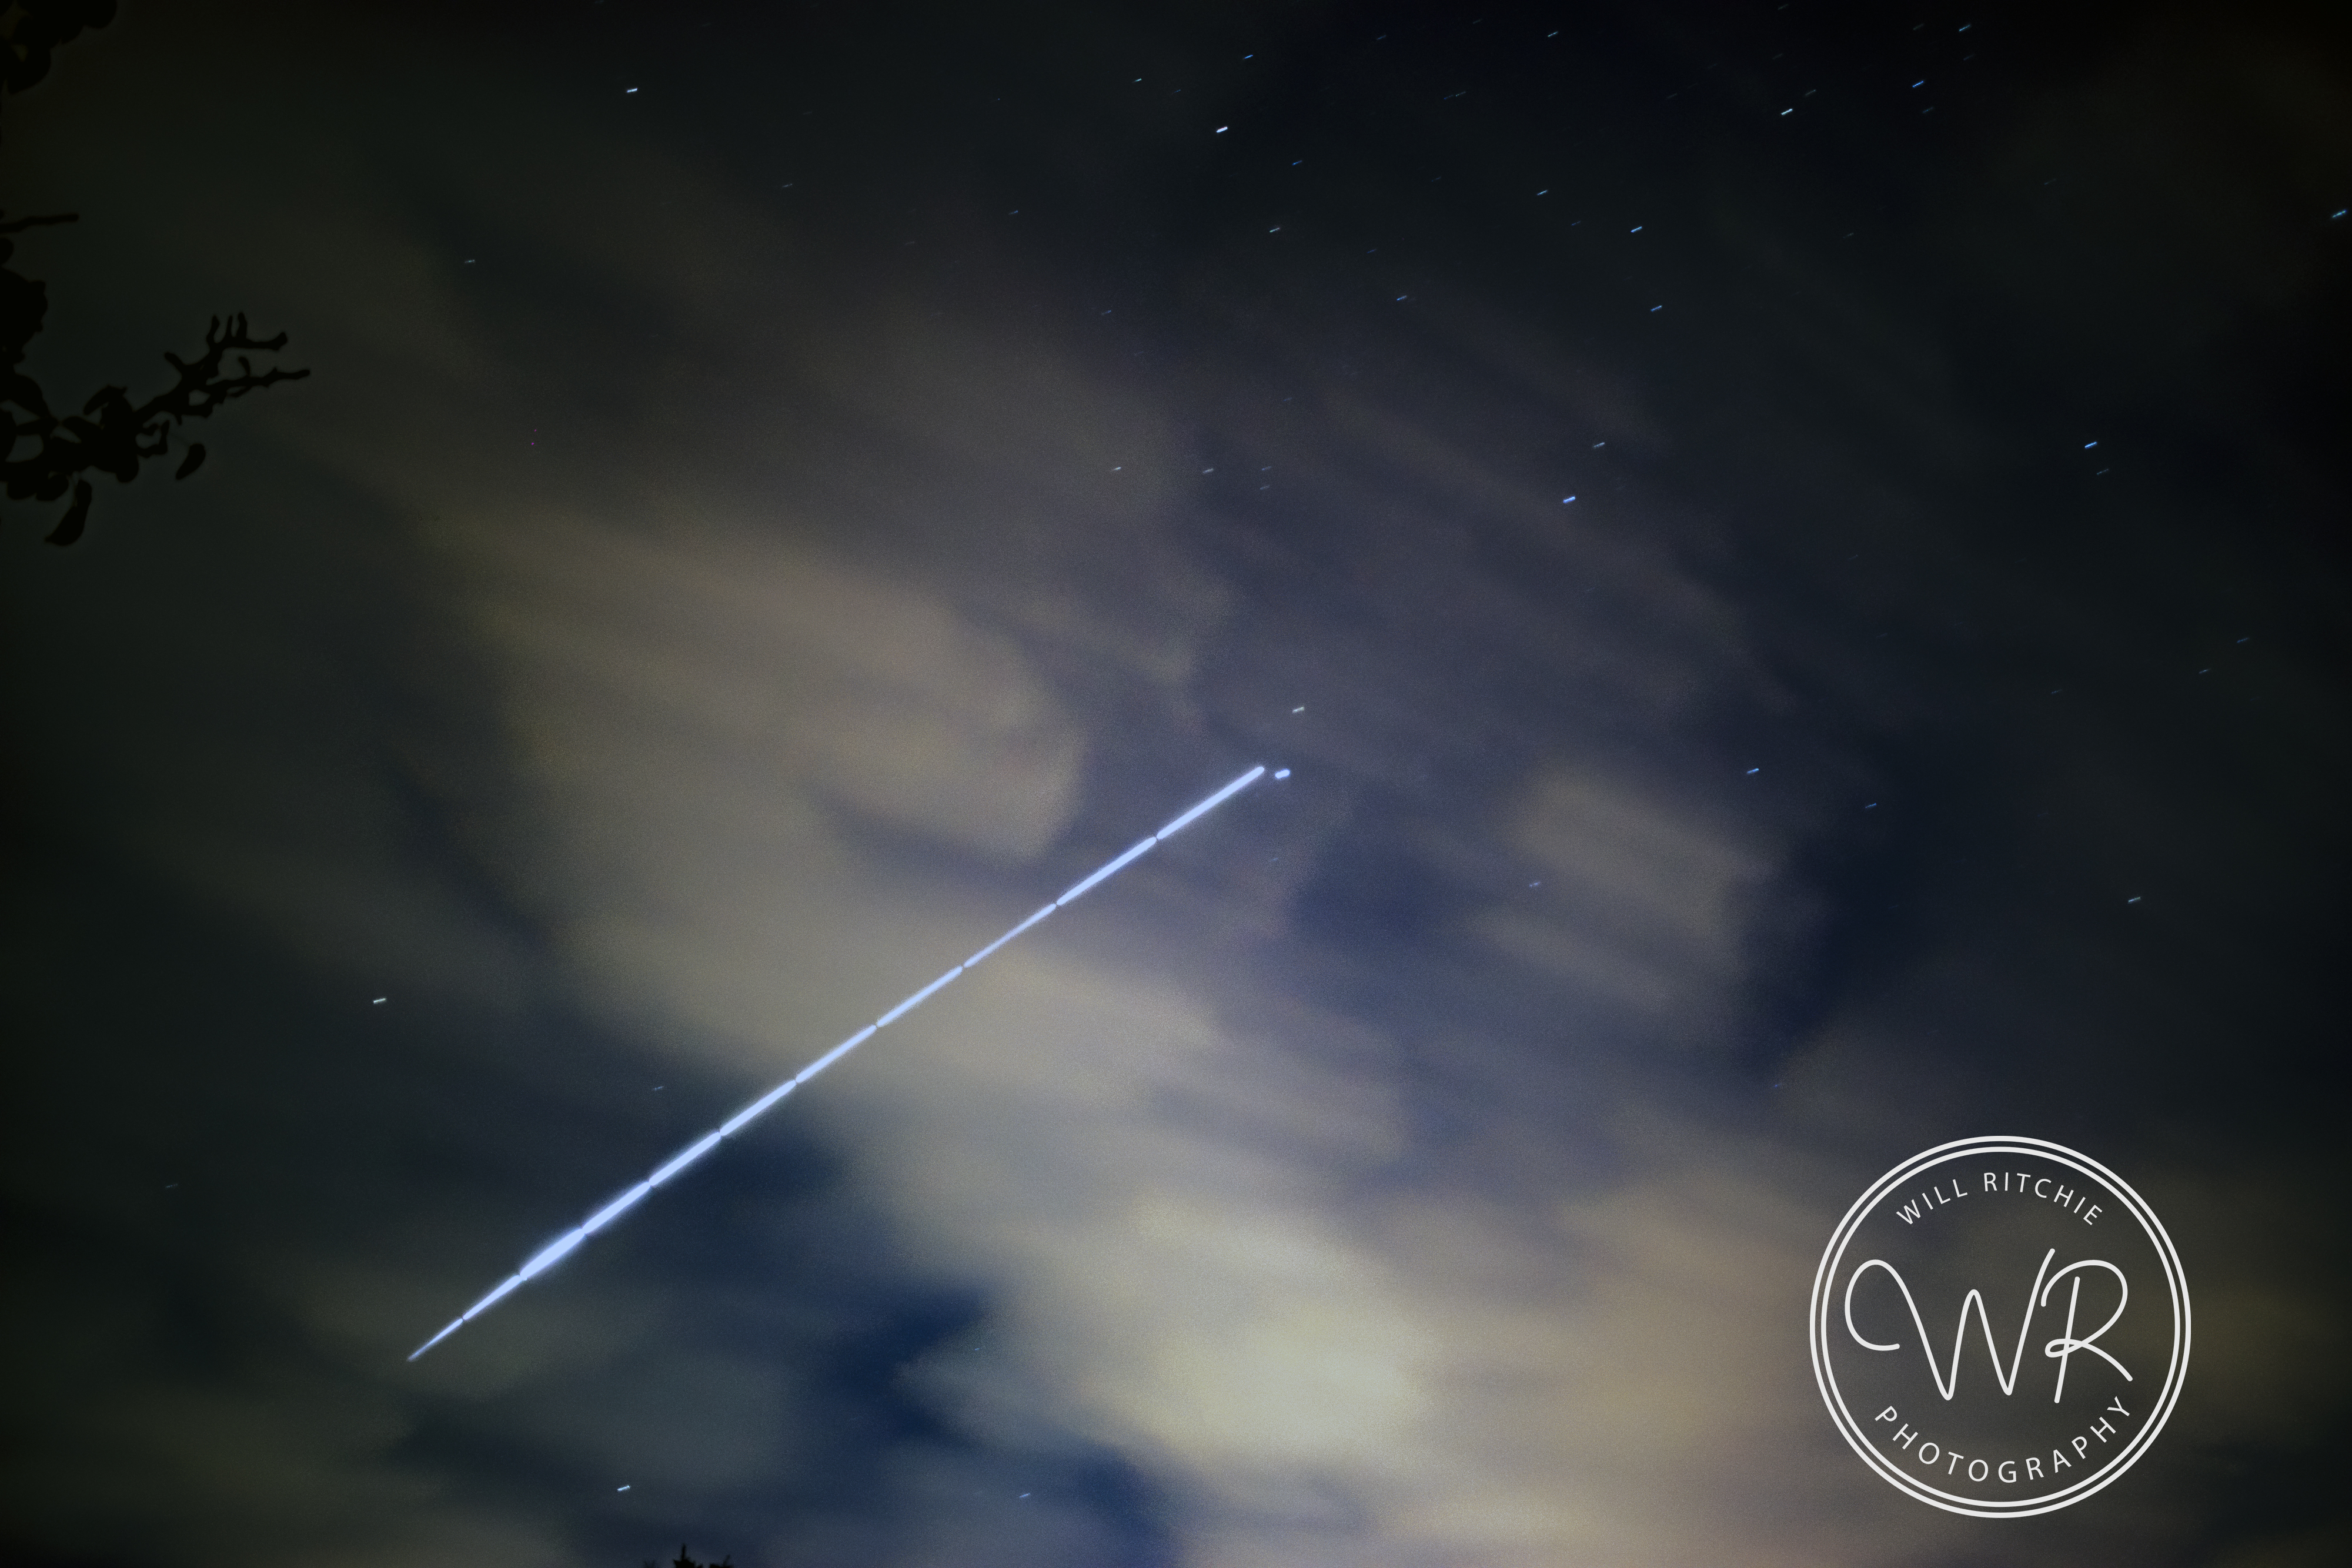 A second shot of the ISS transit yesterday evening.